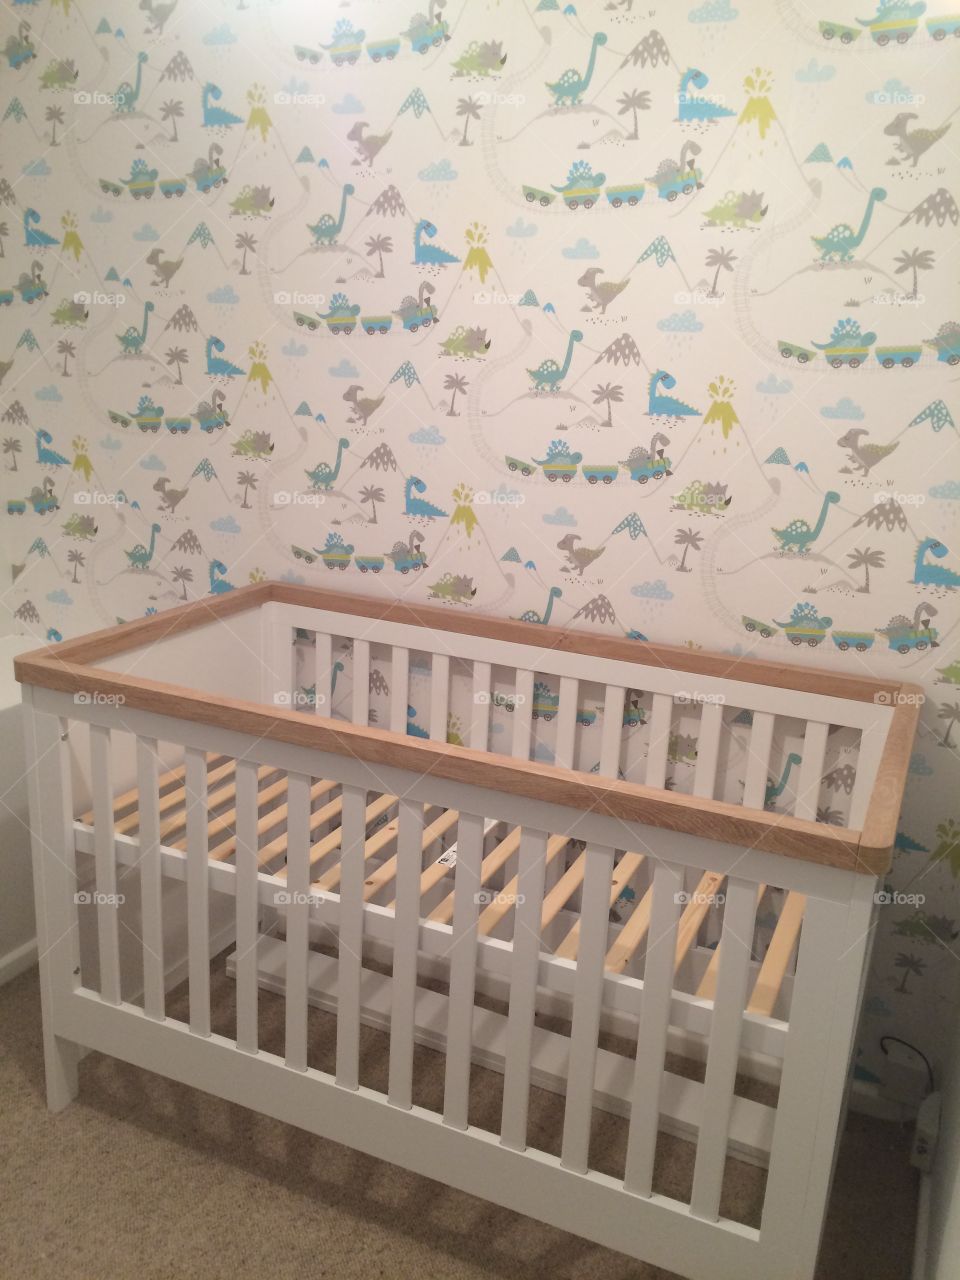 Baby’s nursery room decorated feature wall dinosaur wallpaper crib cot bed 